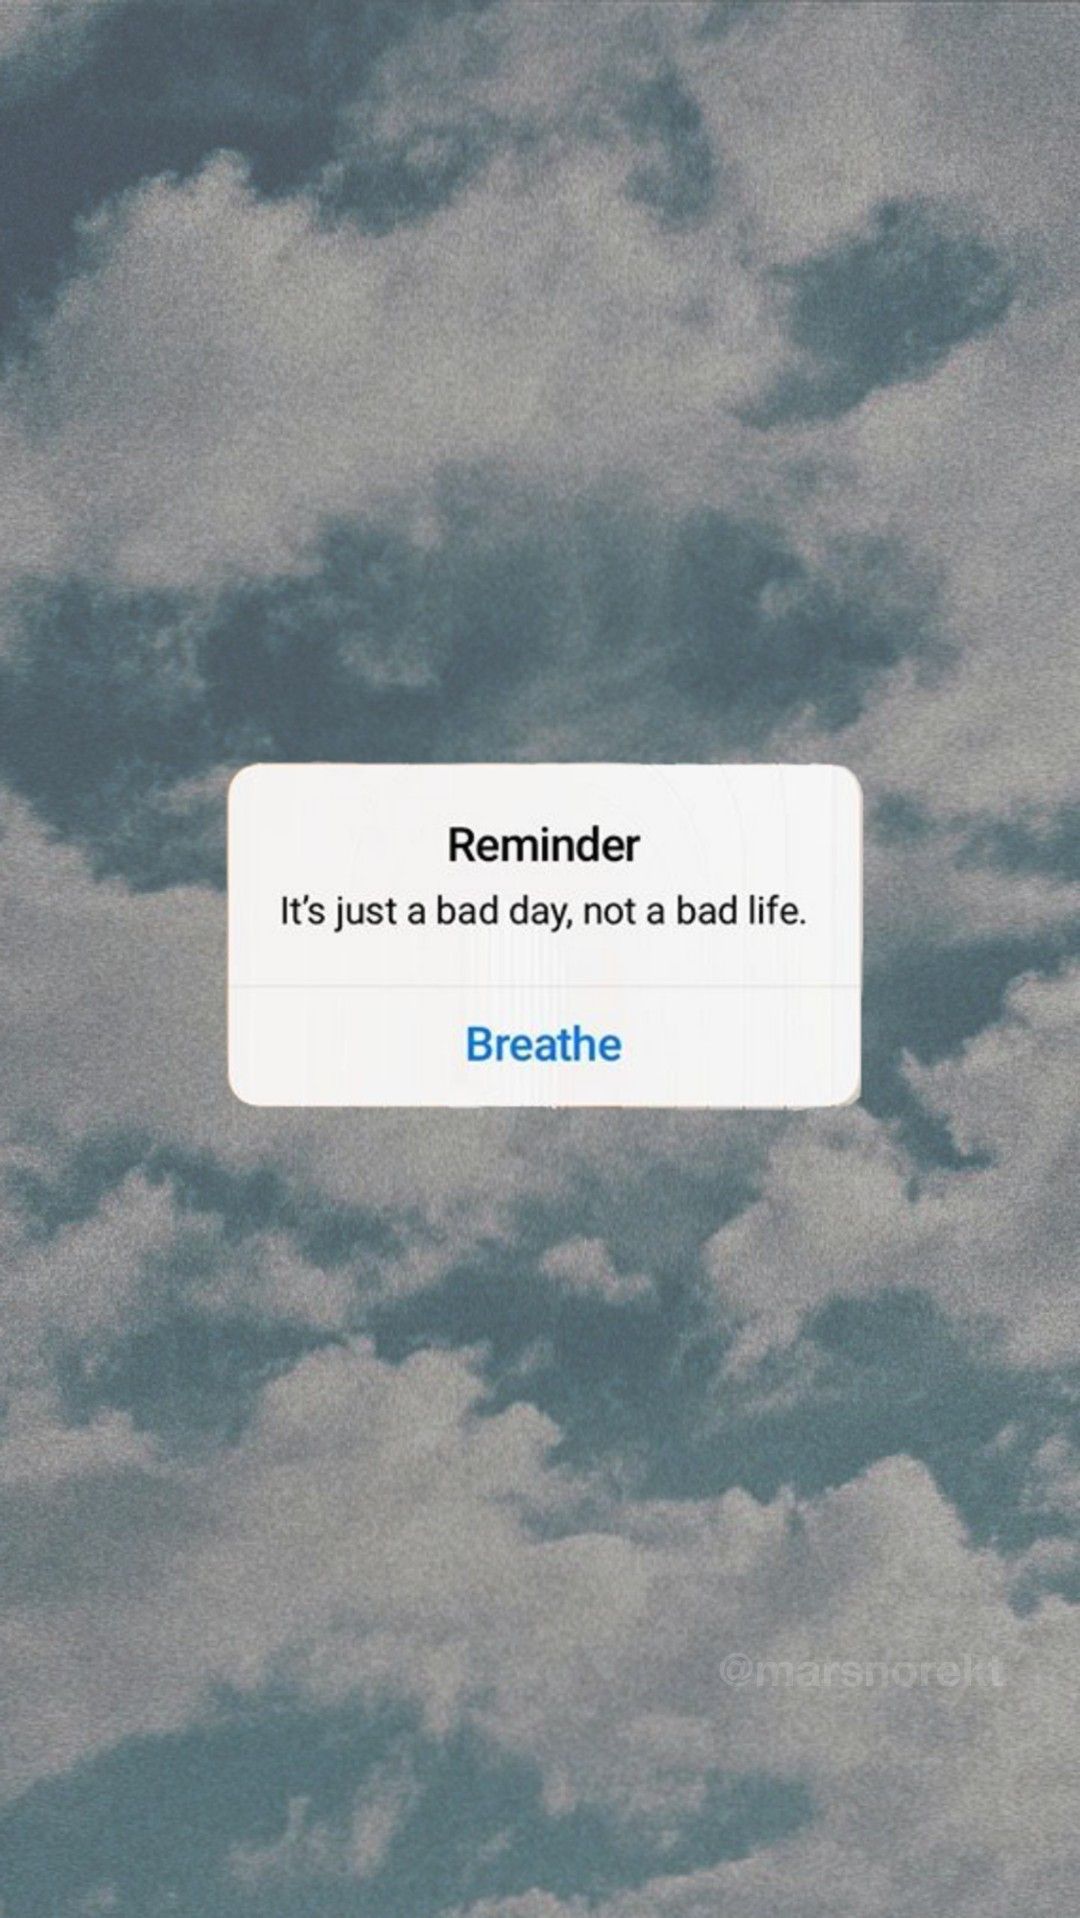 reminder, its a bad day, not a bad life. Reminder quotes, Positive quotes wallpaper, Motivational art quotes